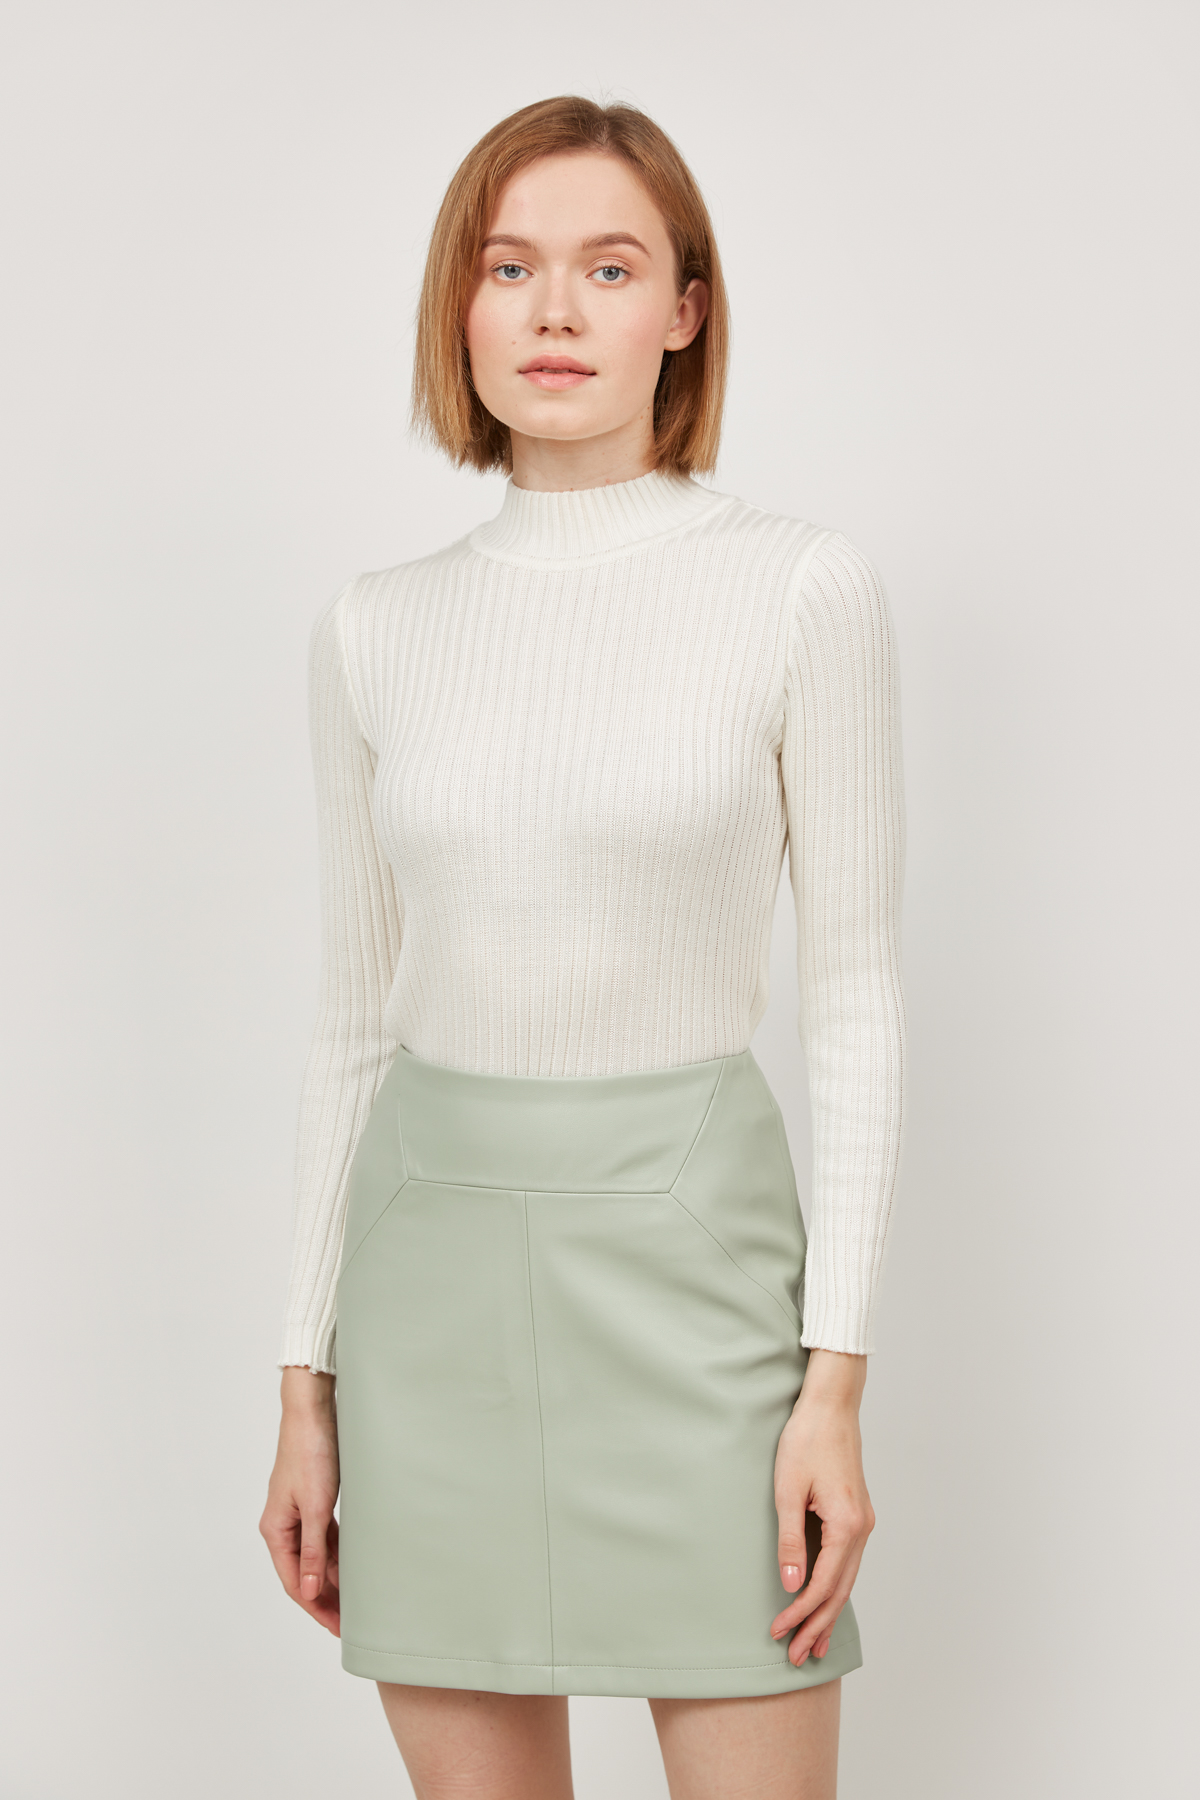 Knitted white jumper, photo 1